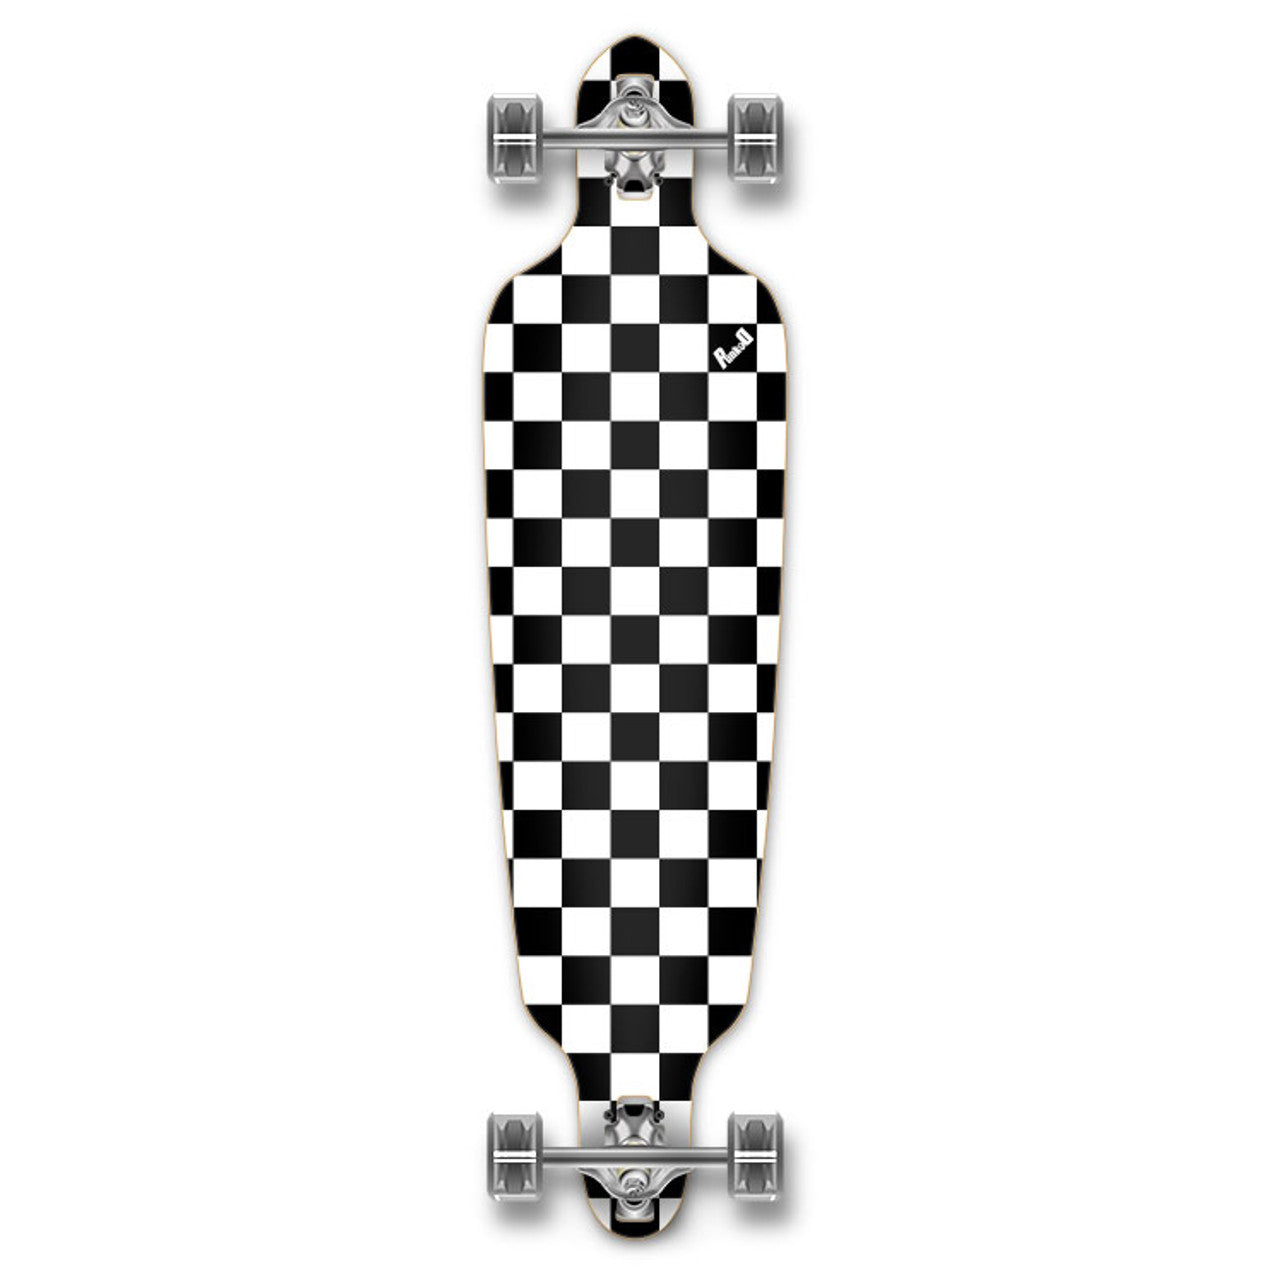 Yocaher Drop Through Longboard Complete - Checker White